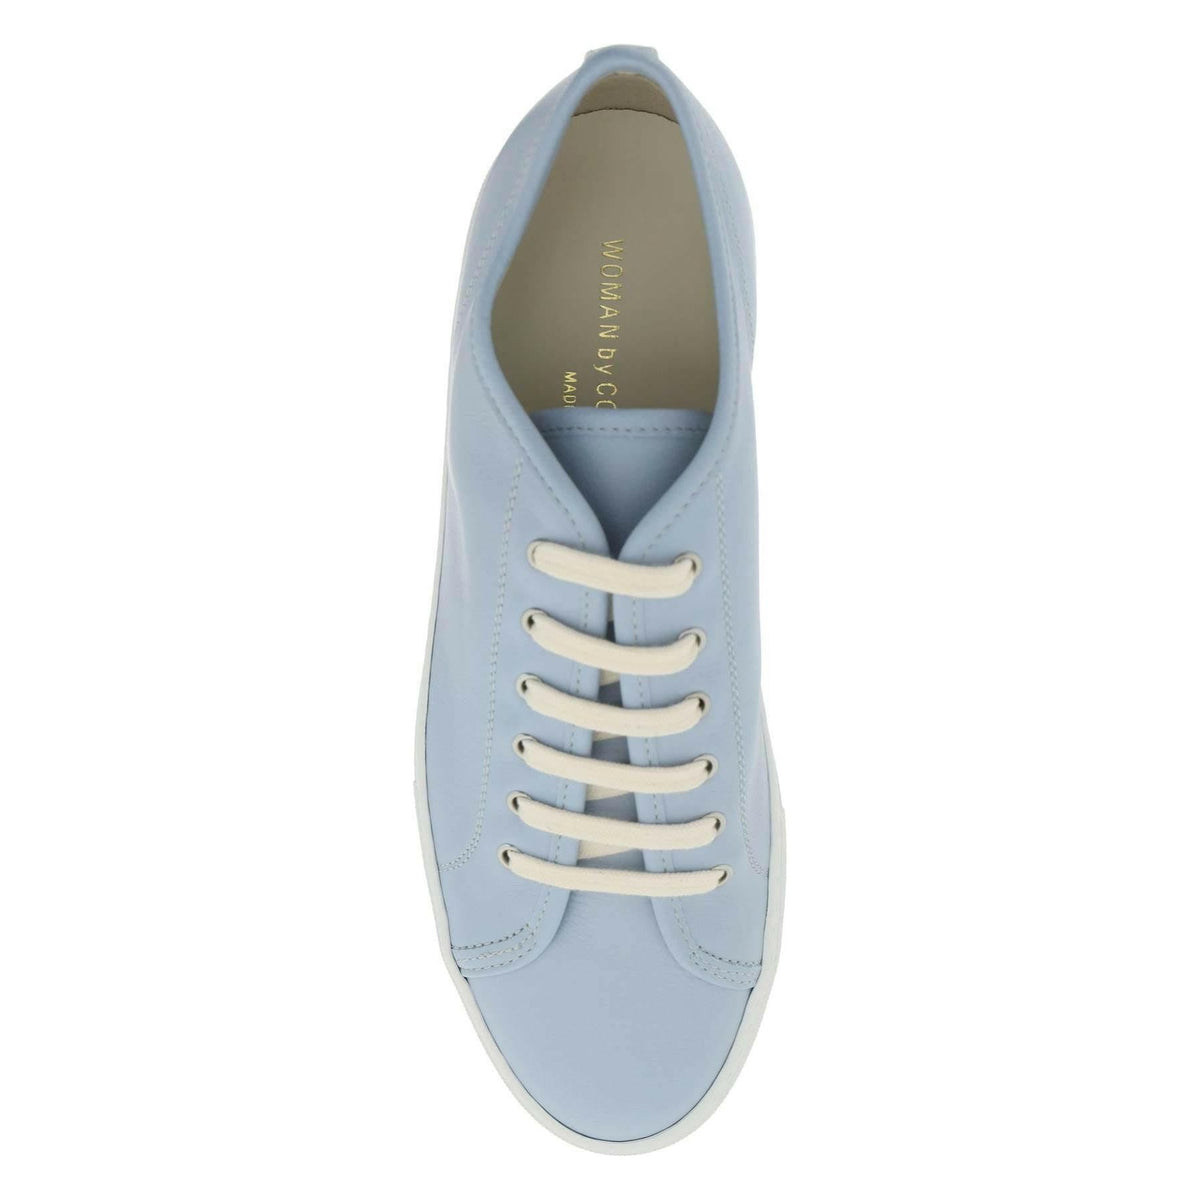 Leather Tournament Low Super Sneakers COMMON PROJECTS JOHN JULIA.